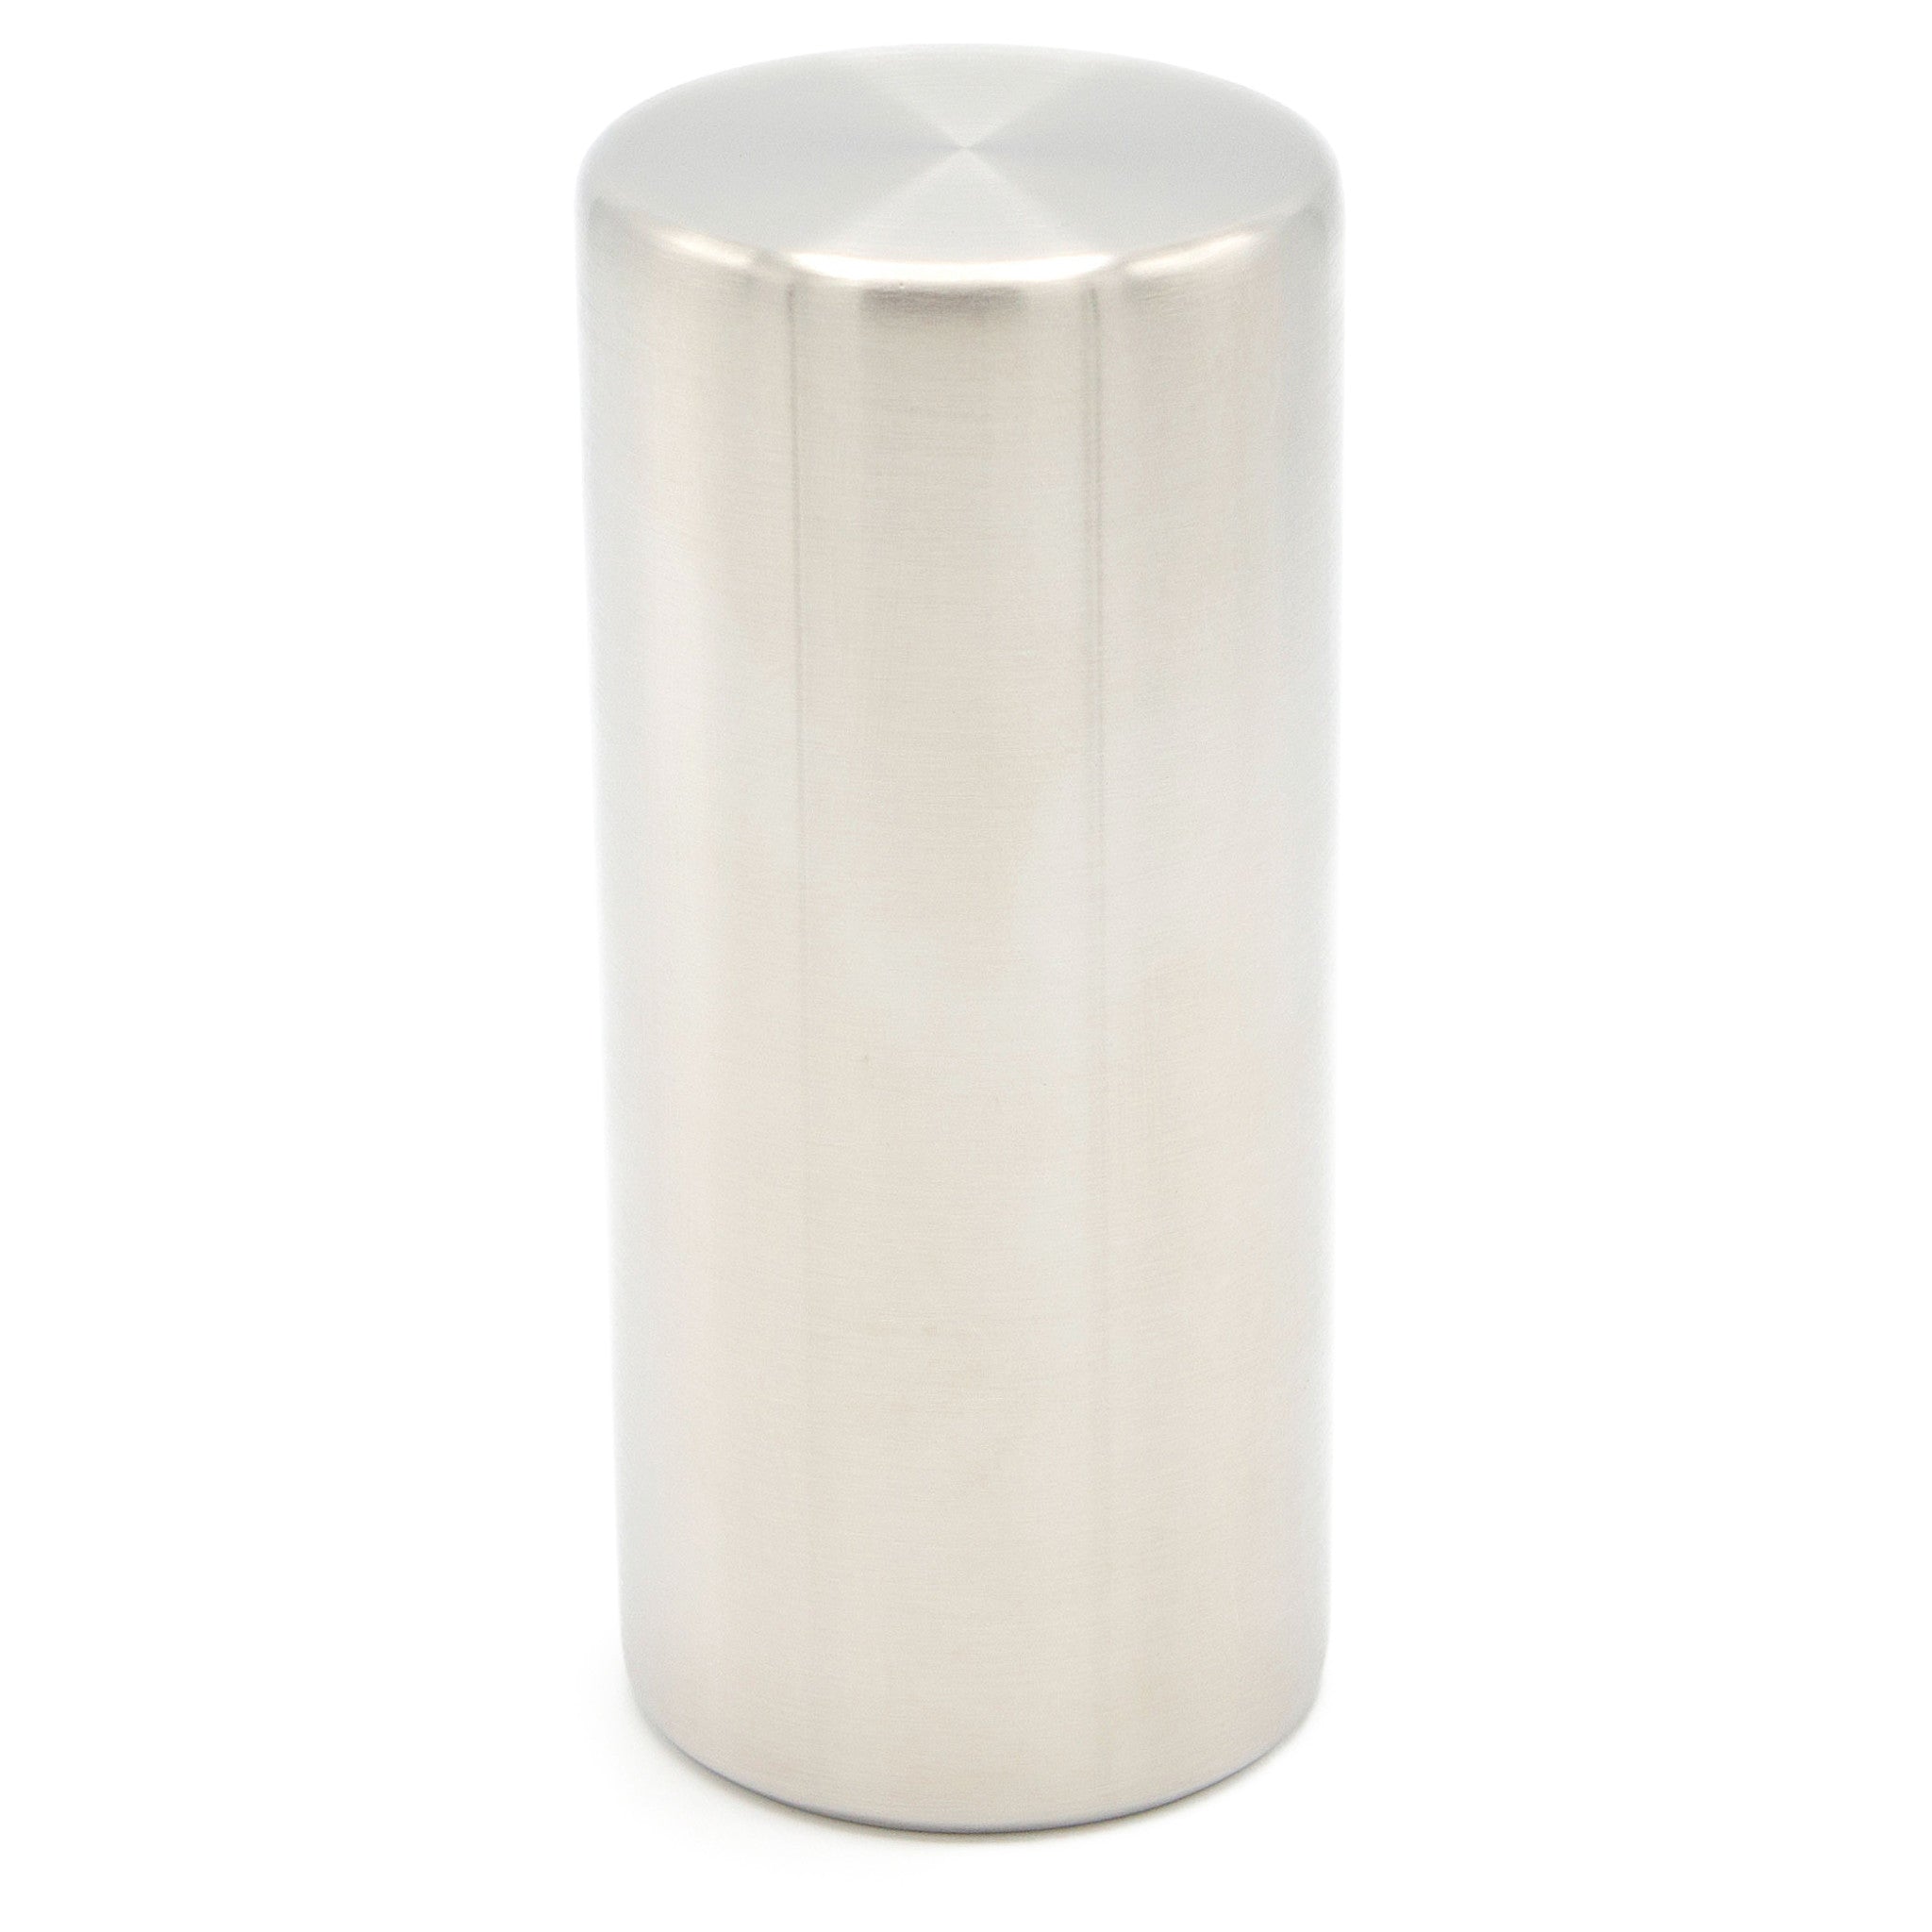 Bourne Cylinder Large Stainless Steel Cremation Ashes Urn TOW